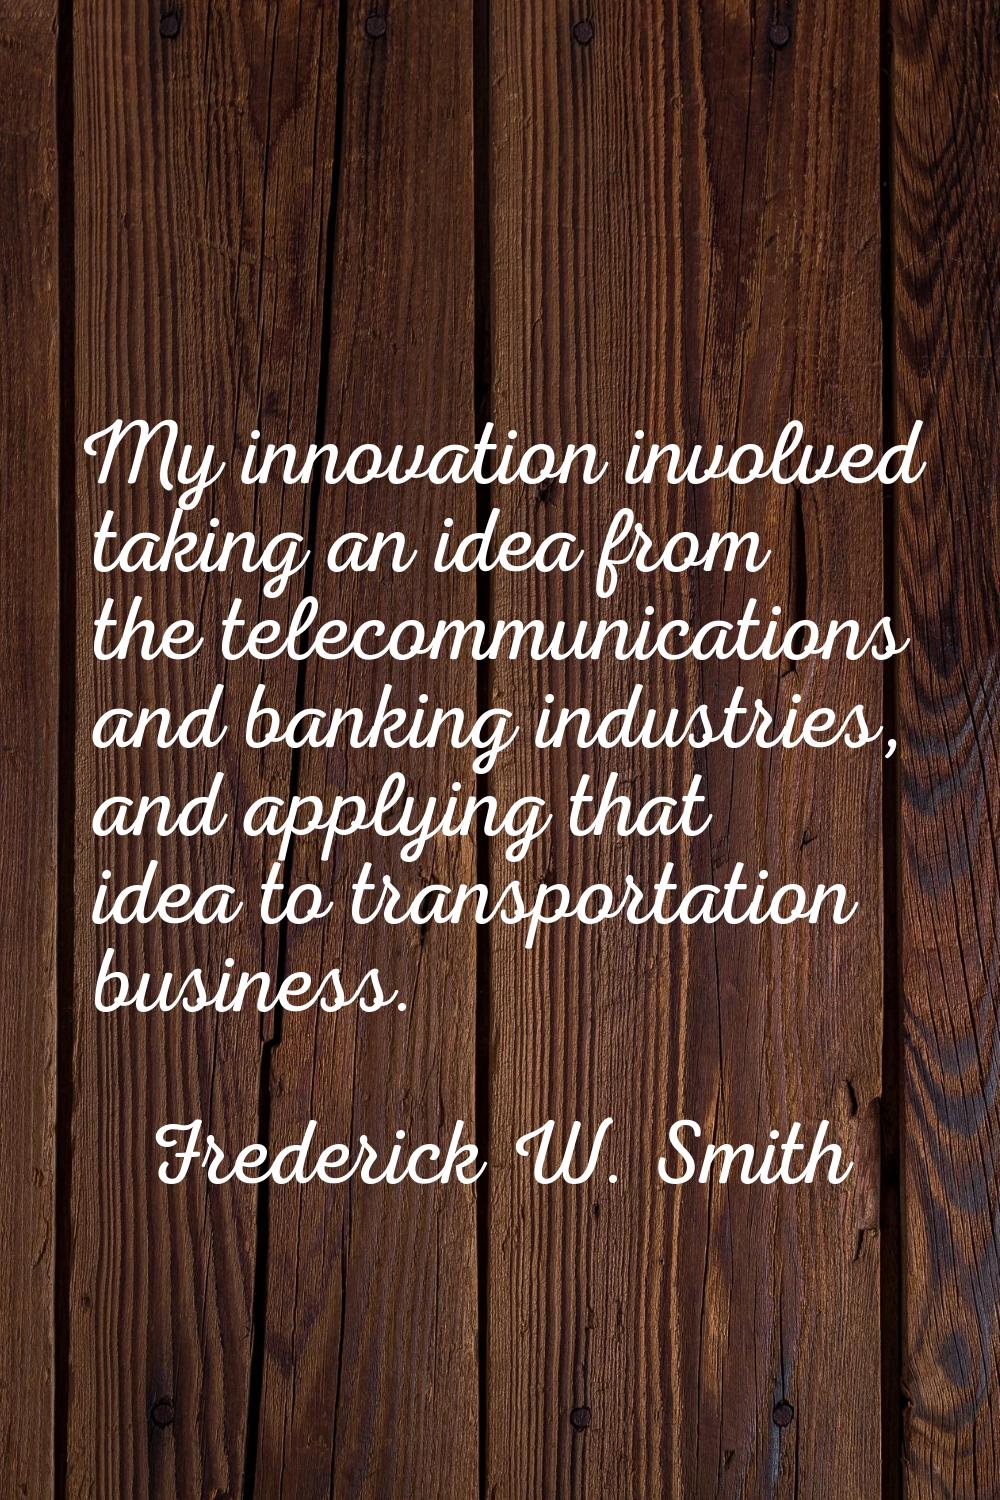 My innovation involved taking an idea from the telecommunications and banking industries, and apply